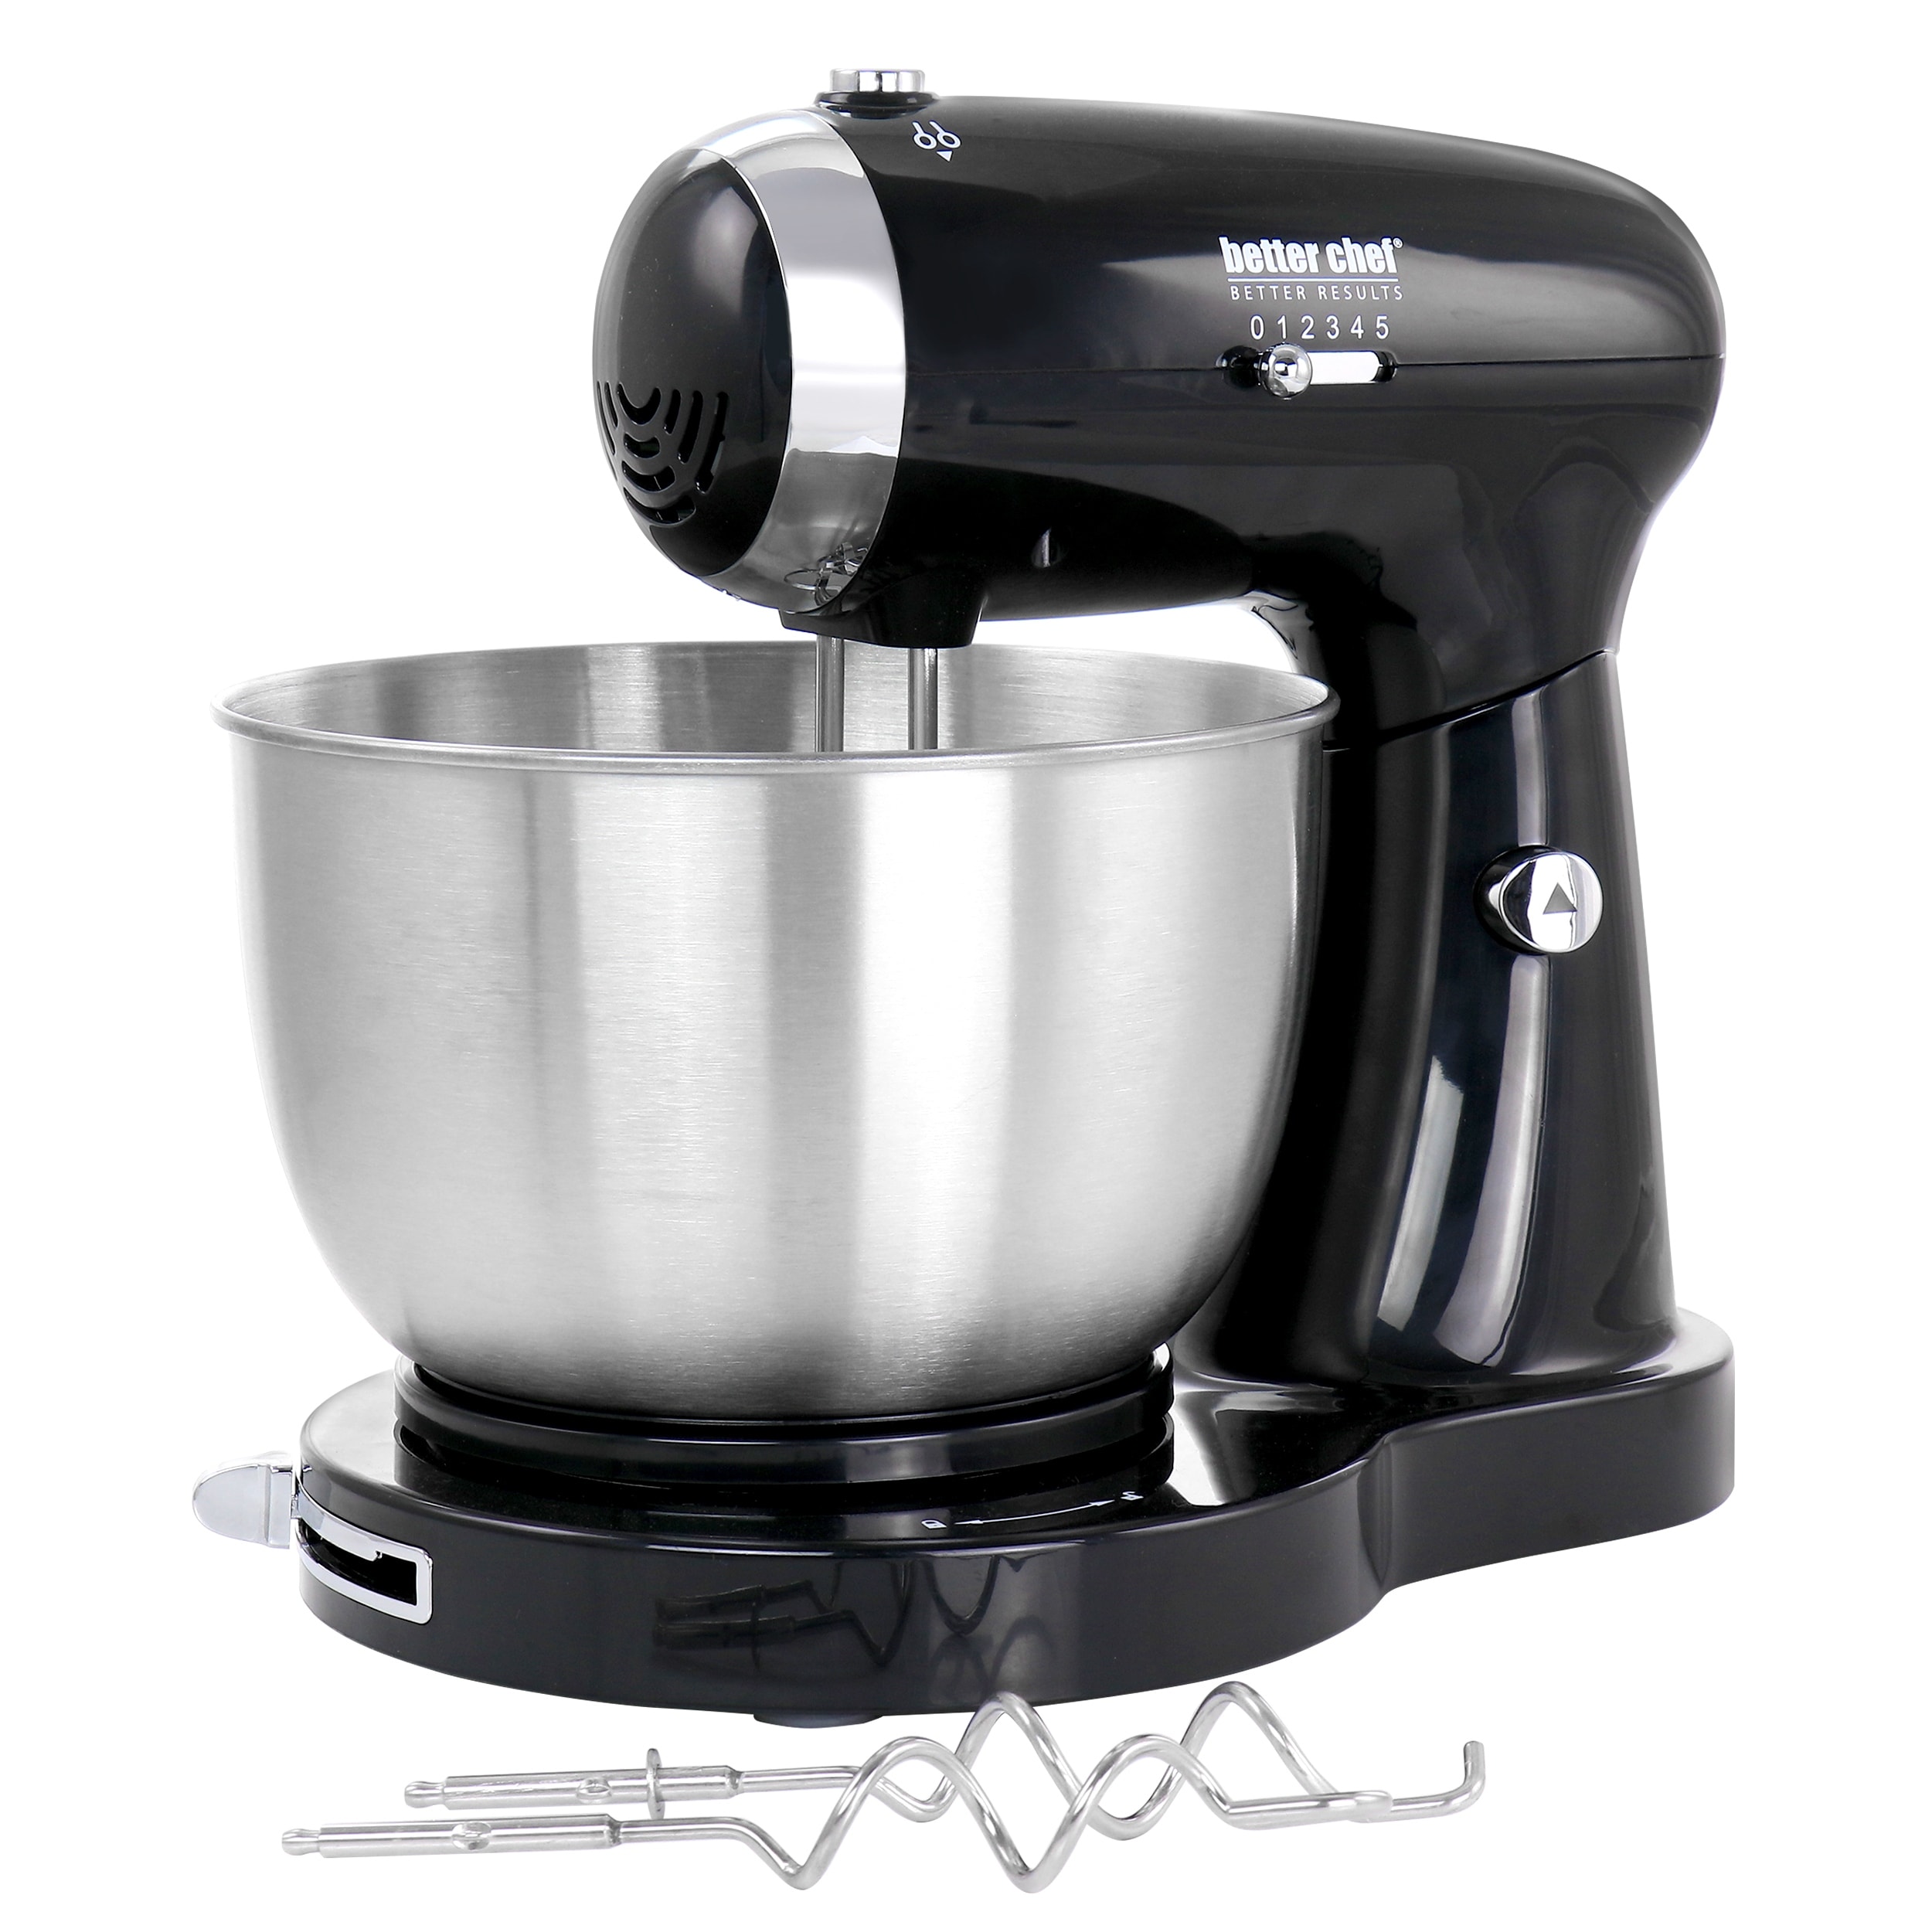 Whall Black Kinfai Electric Kitchen Stand Mixer Machine with 4.5